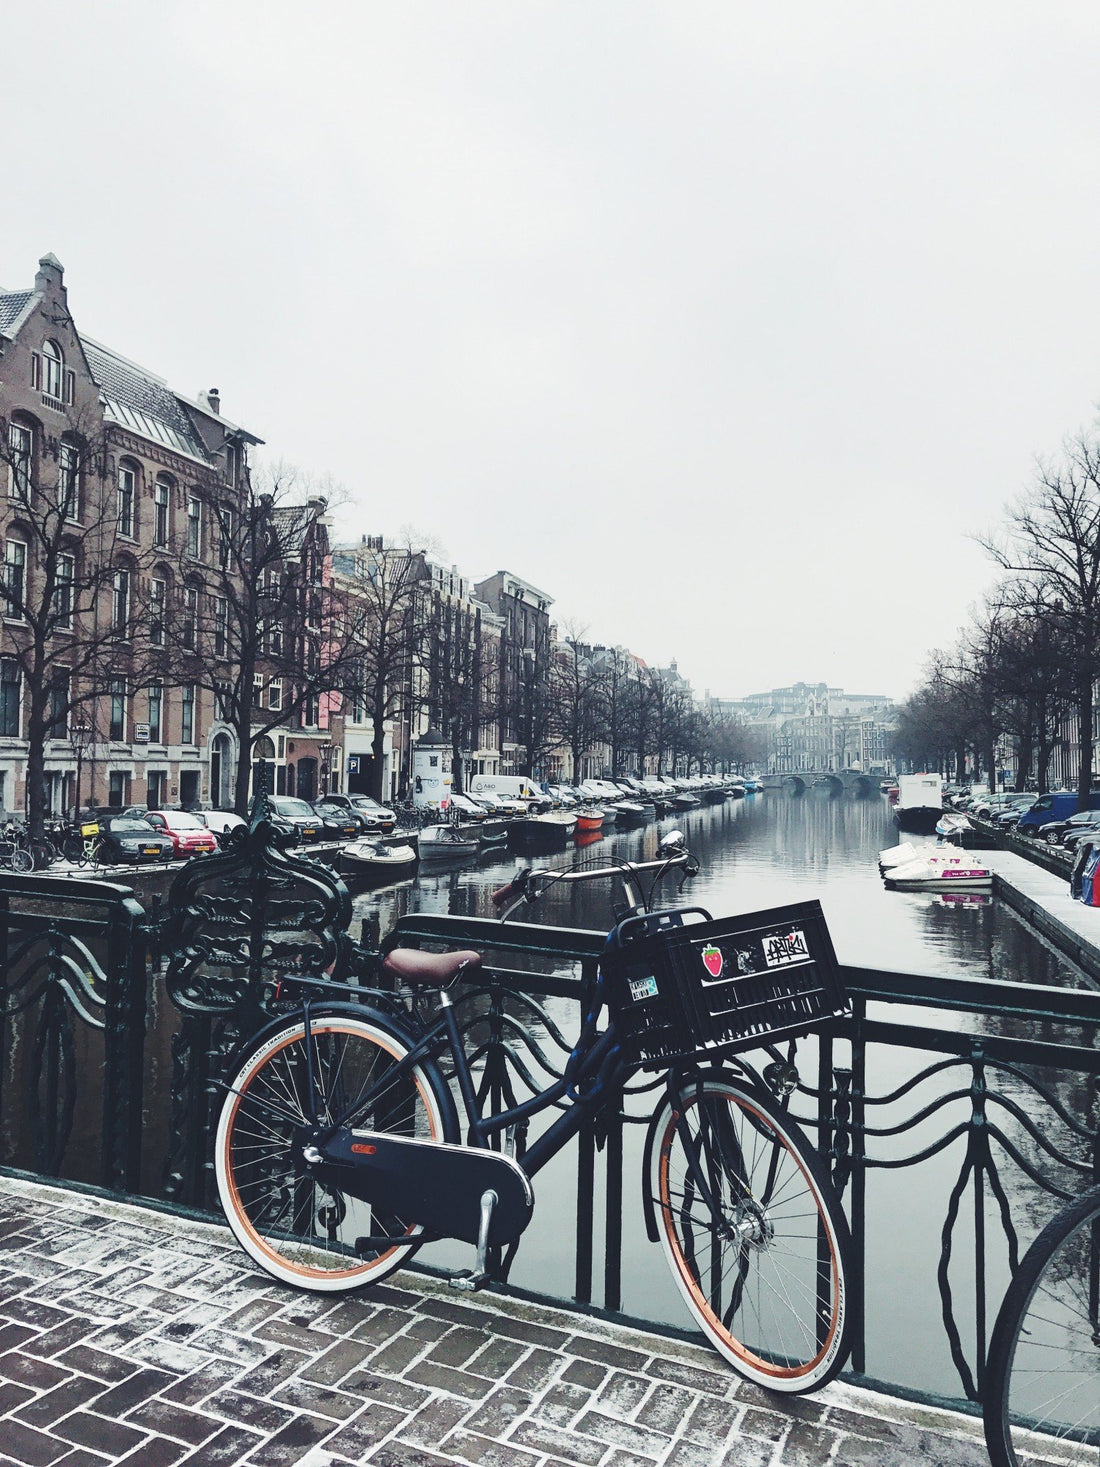 Amsterdam City Guide 2017 - This Way